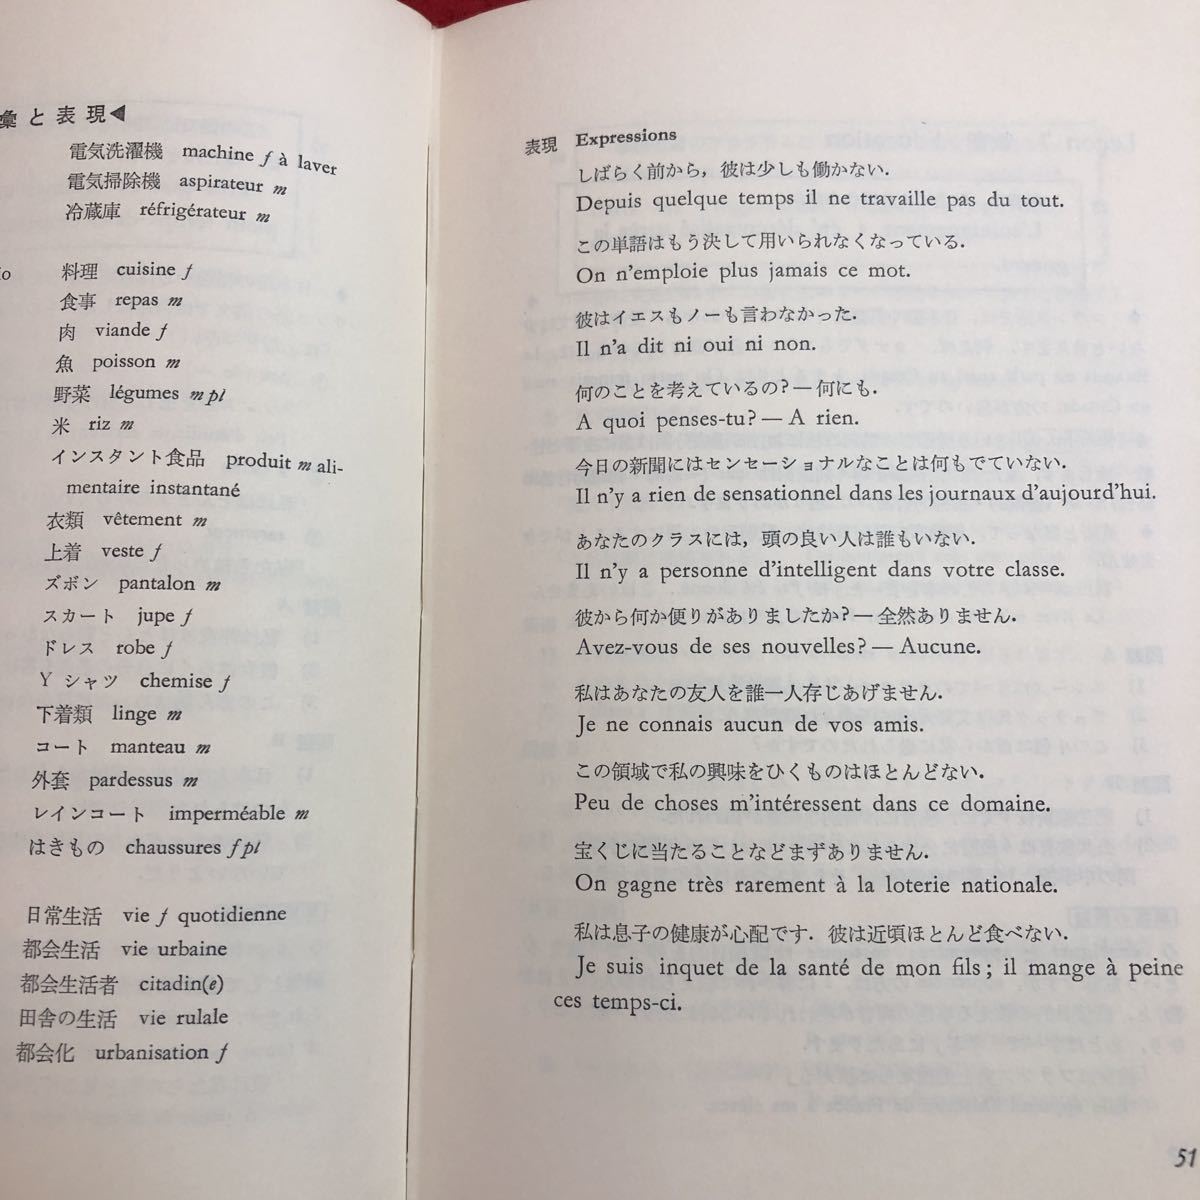 M6e-031 standard French course 3 composition author Fukui . man 1974 year 4 month 1 day 3 version issue large . pavilion bookstore French teaching material grammar single language table reality life article 